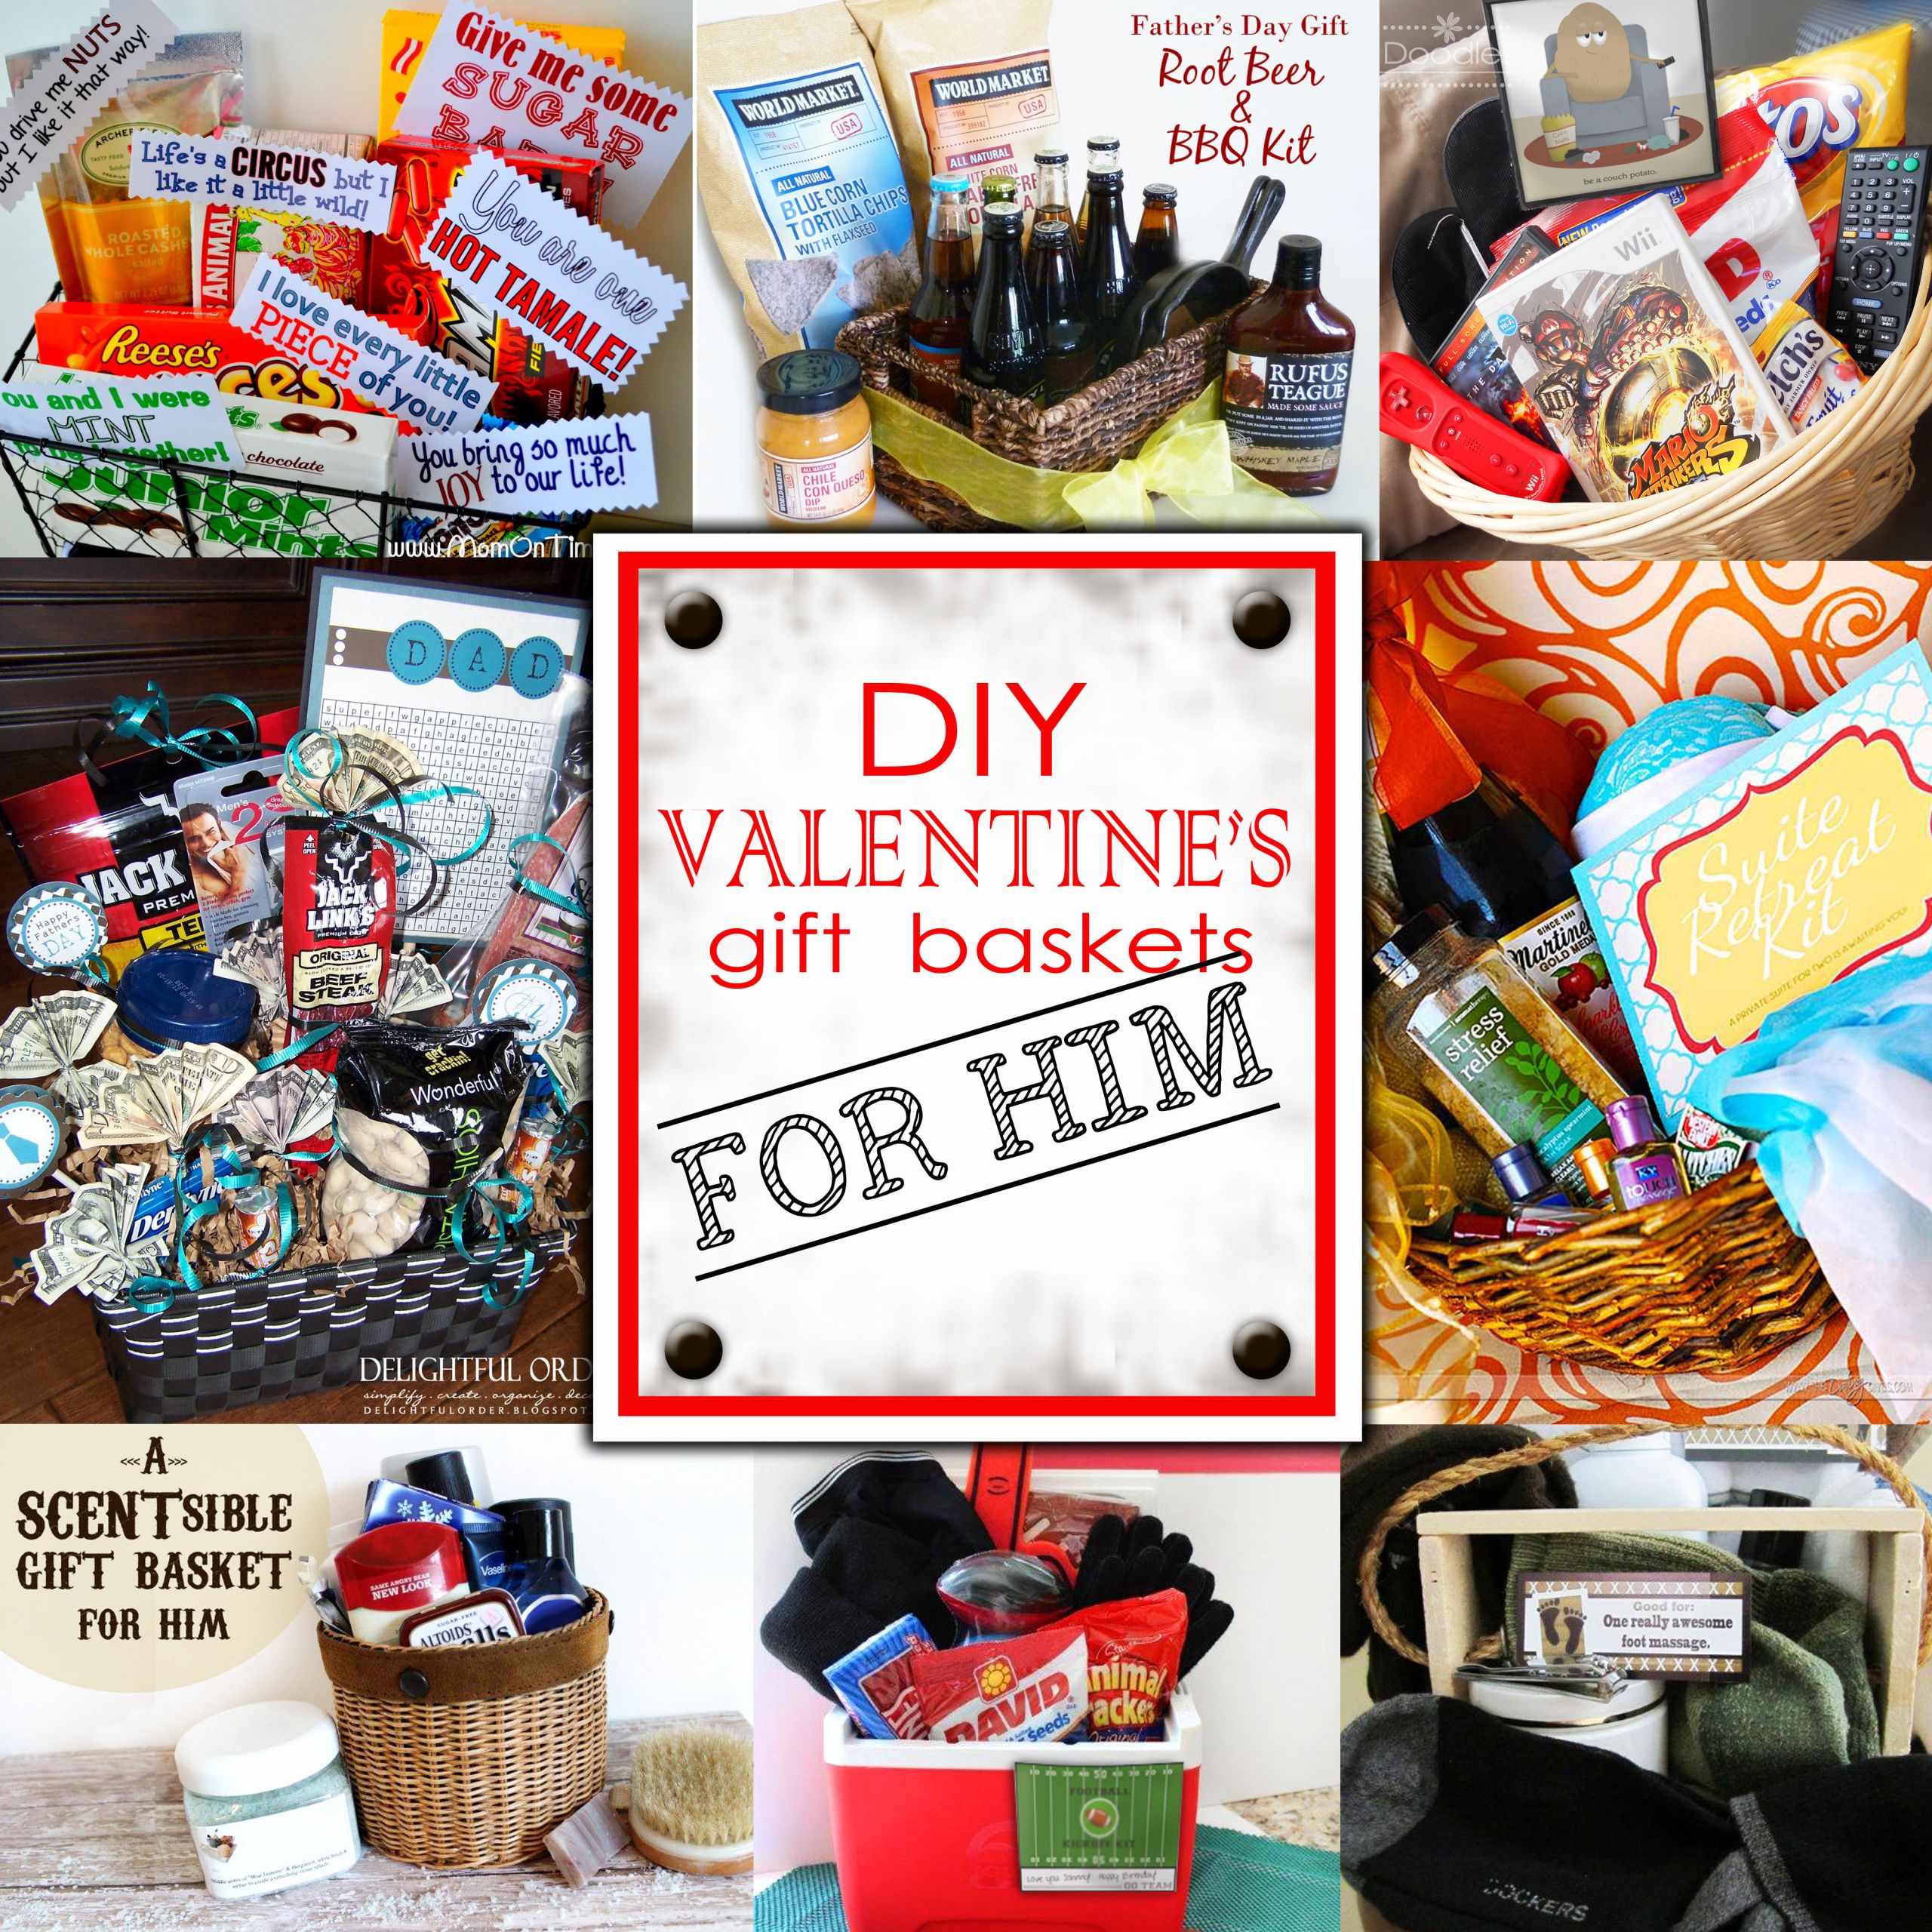 Valentines Day Gift for Him New Diy Valentine S Day Gift Baskets for Him Darling Doodles